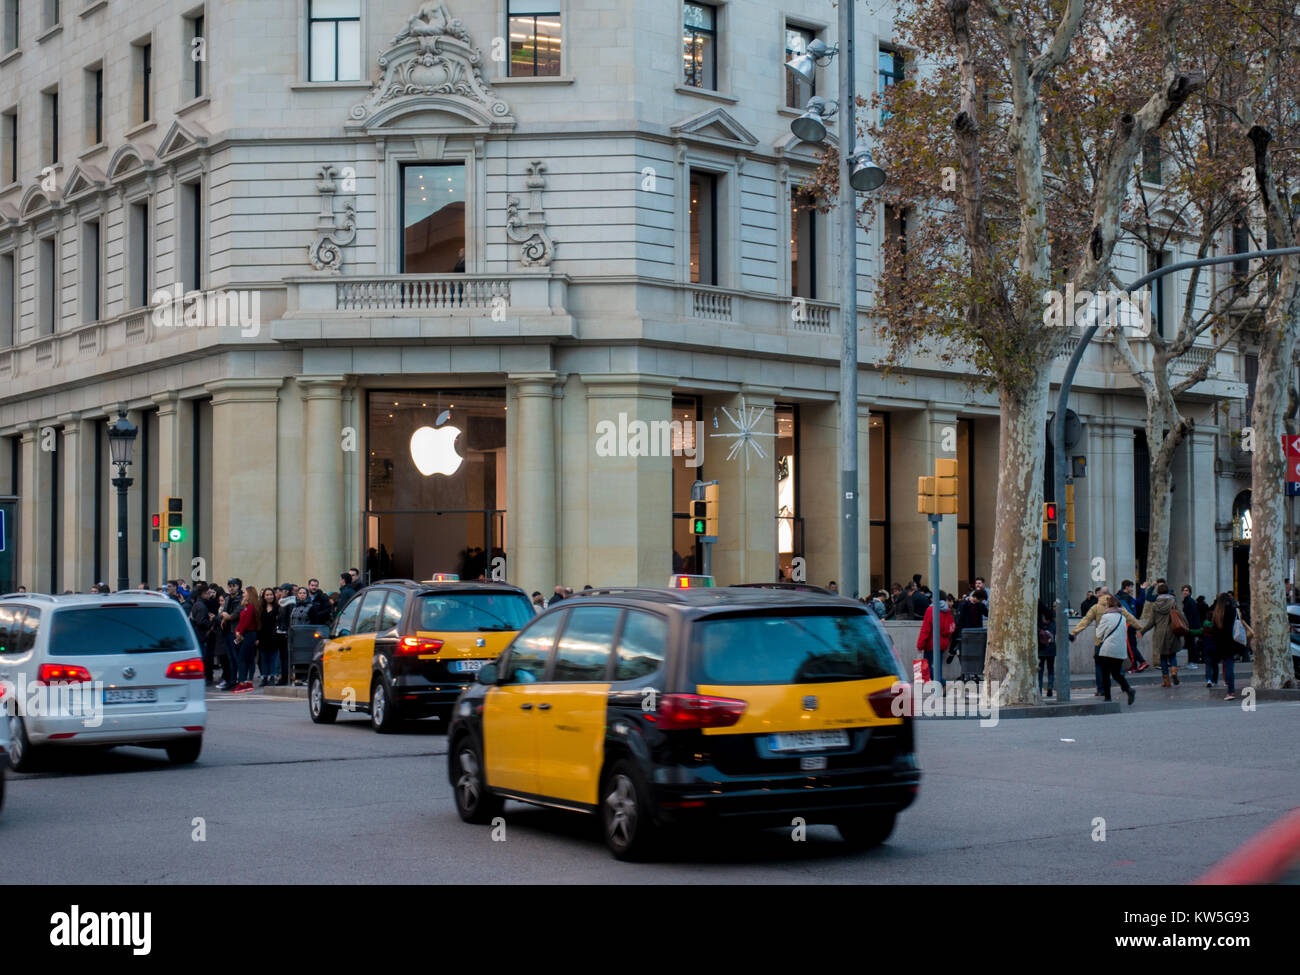 Barcelona, Spain, December 2017. Apple store located in Plaza Catalunya or Catalonia square. This is considered the city centre of Barcelona. Stock Photo